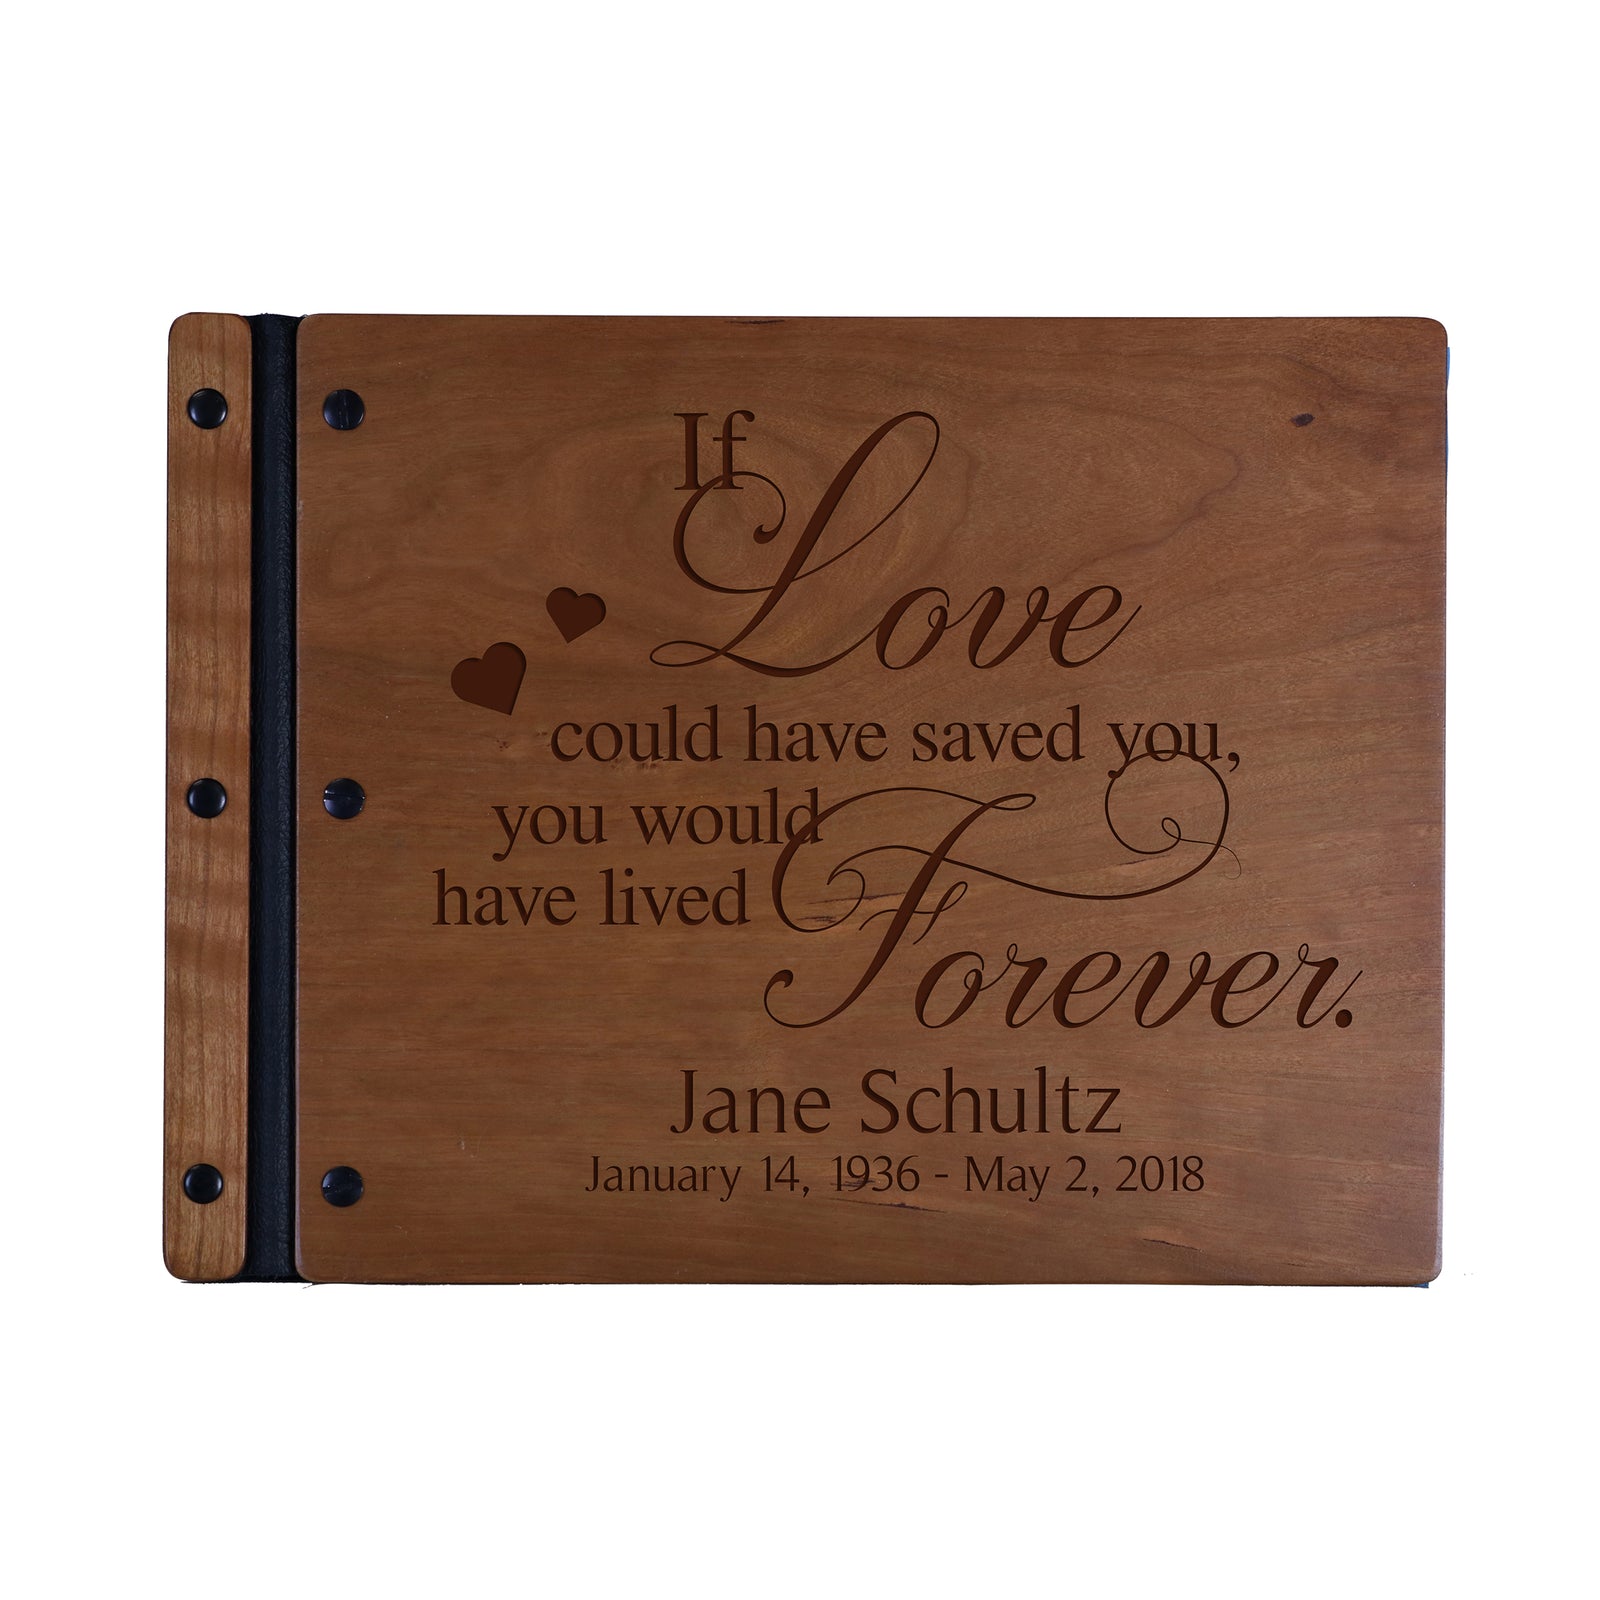 Lifesong Milestones Funeral Guest Book Personalized Wooden Memorial Guestbook Celebration of Life Guest Book Remembrance In Loving Memory Keepsake 13.375” x 10” x .75”-If Love Could Have Saved You